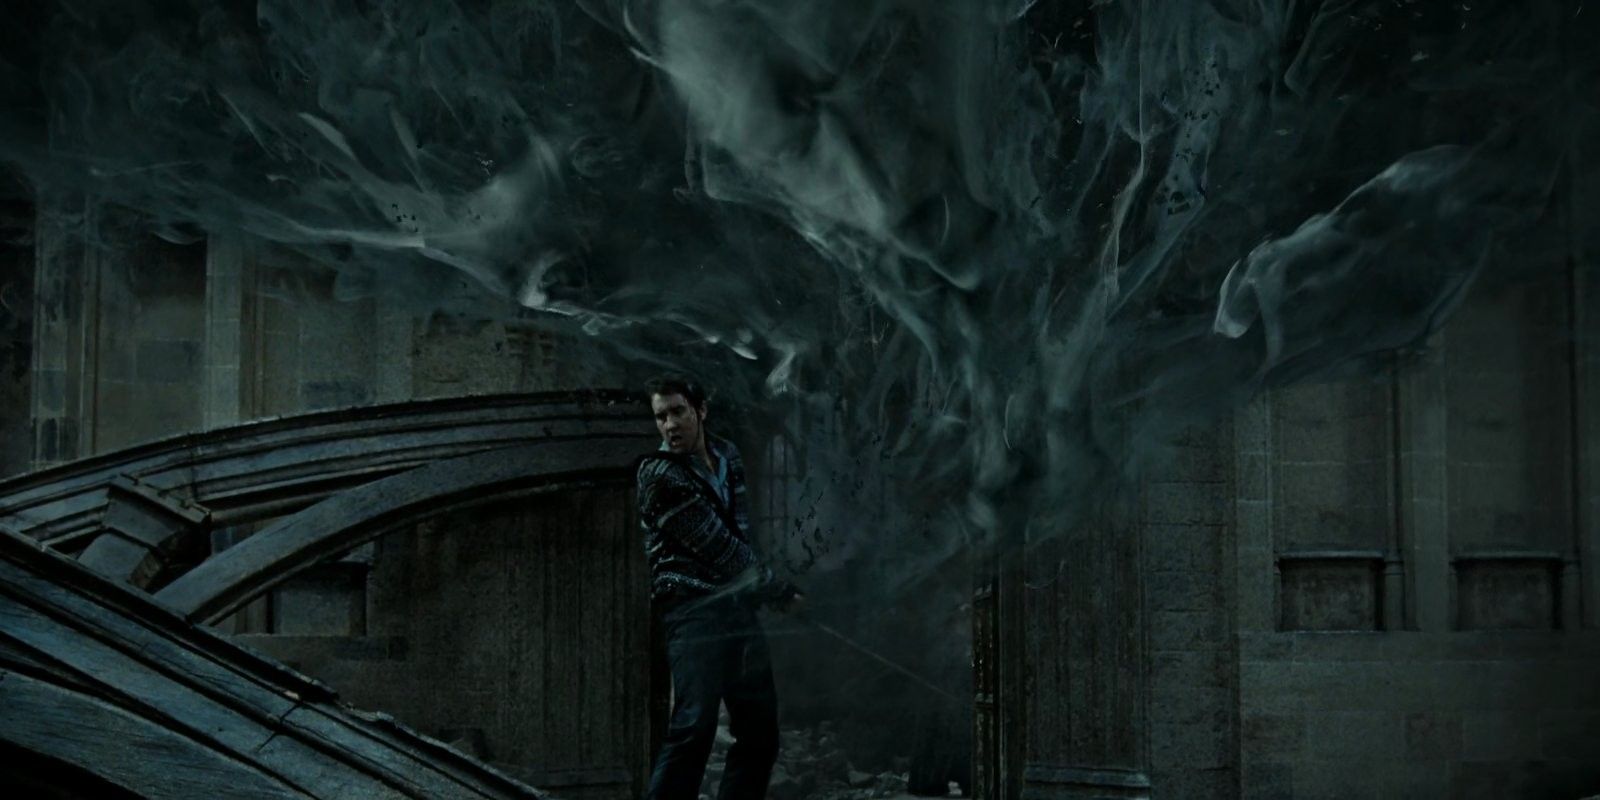 Neville kills Nagini in Harry Potter and the Deathly Hallows Part 2: